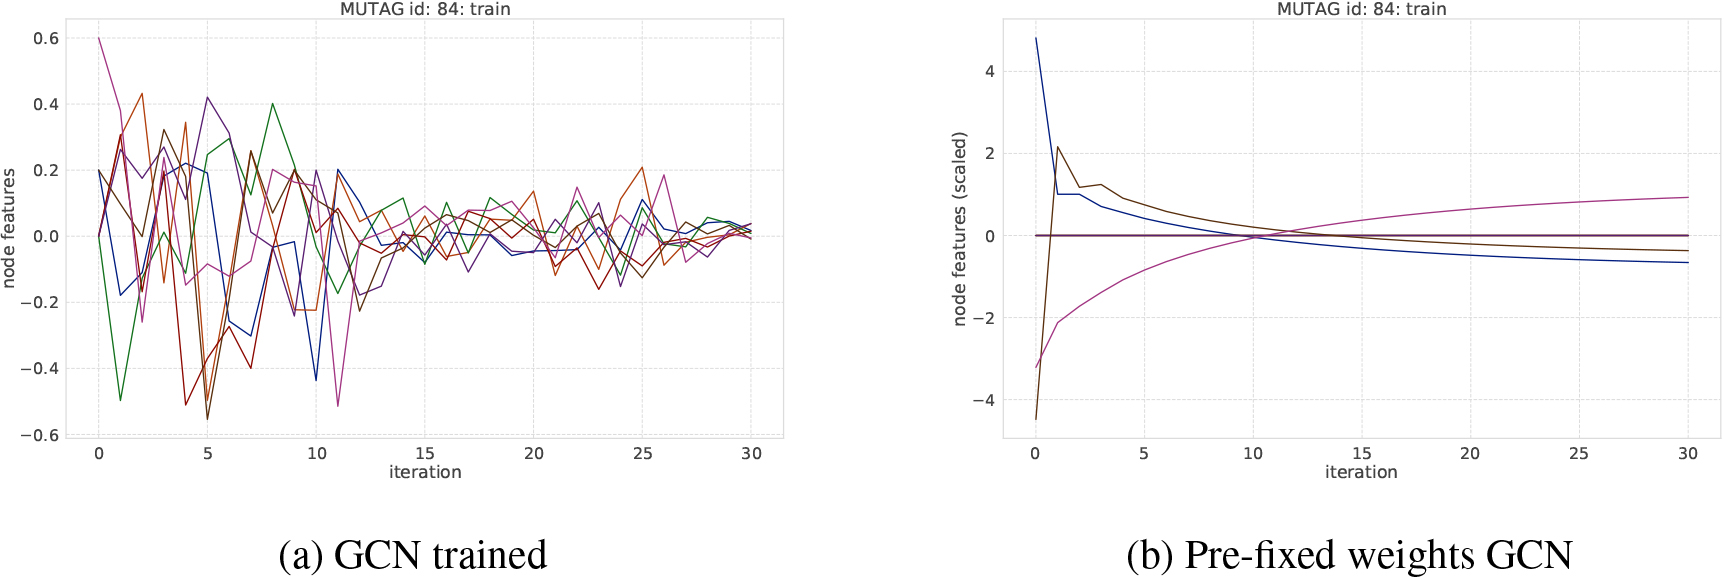 An example of transition of node features on MUTAG dataset. Each curve represents the averaged node feature value in a graph at each iteration step.